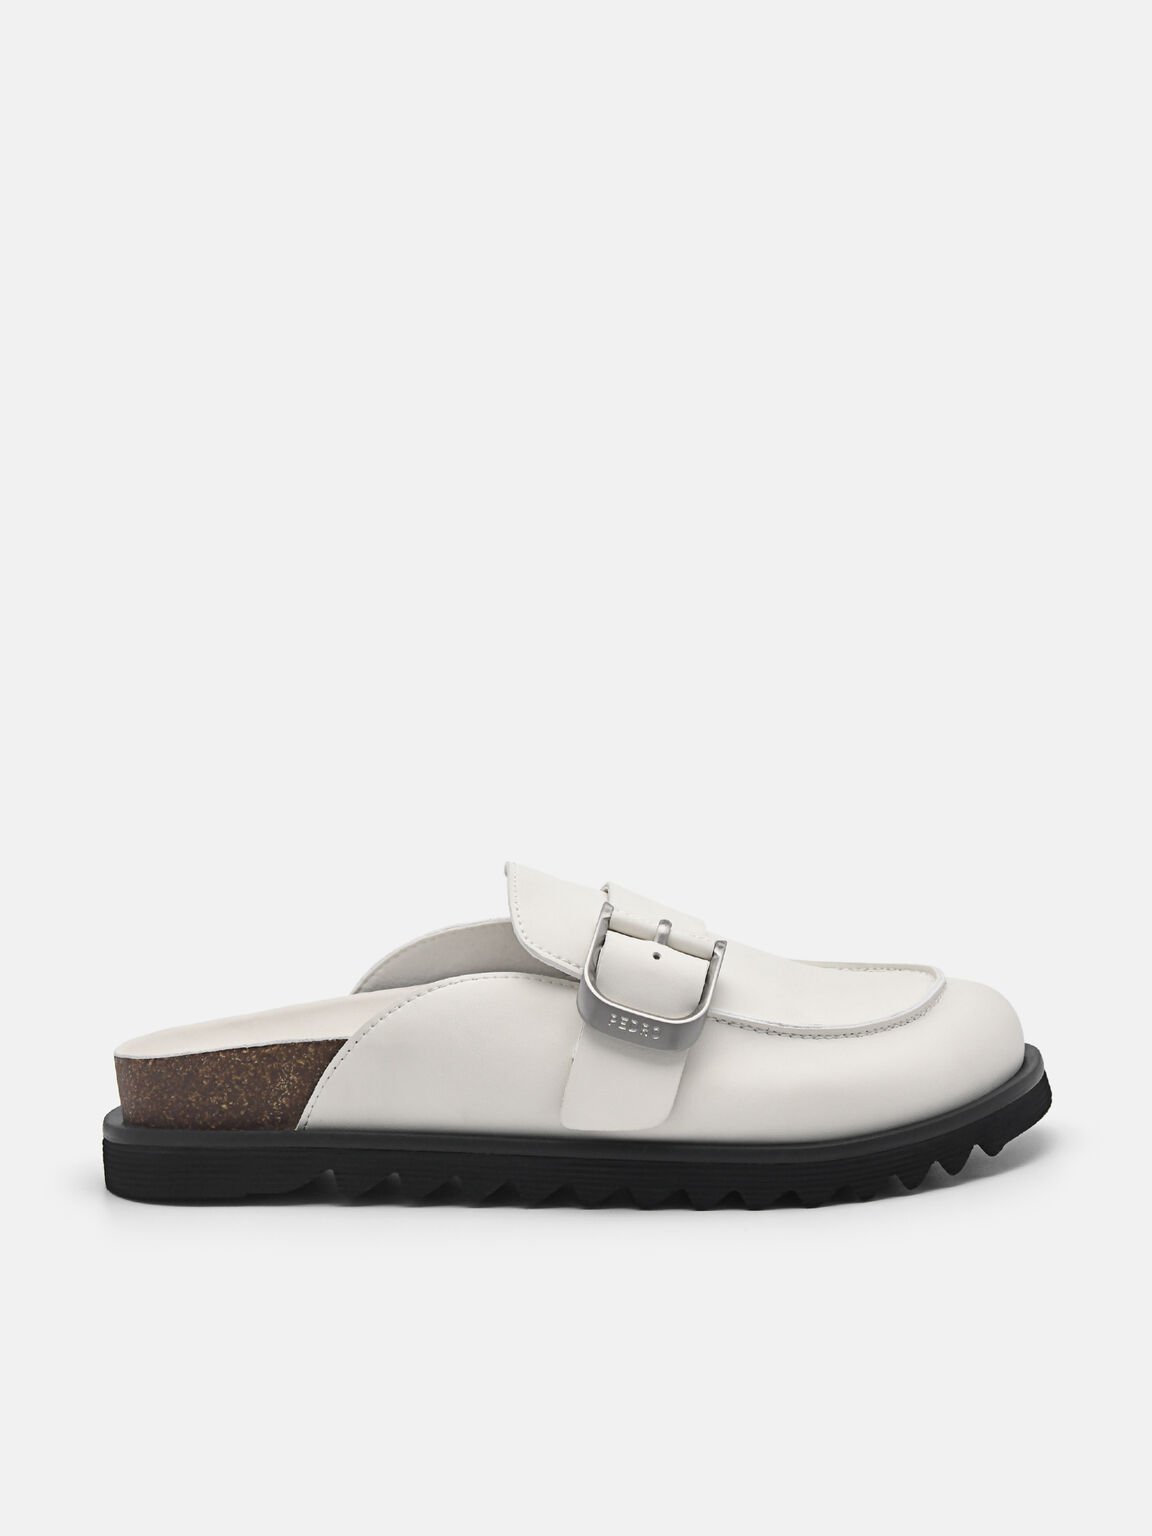 Helix Mules, White, hi-res